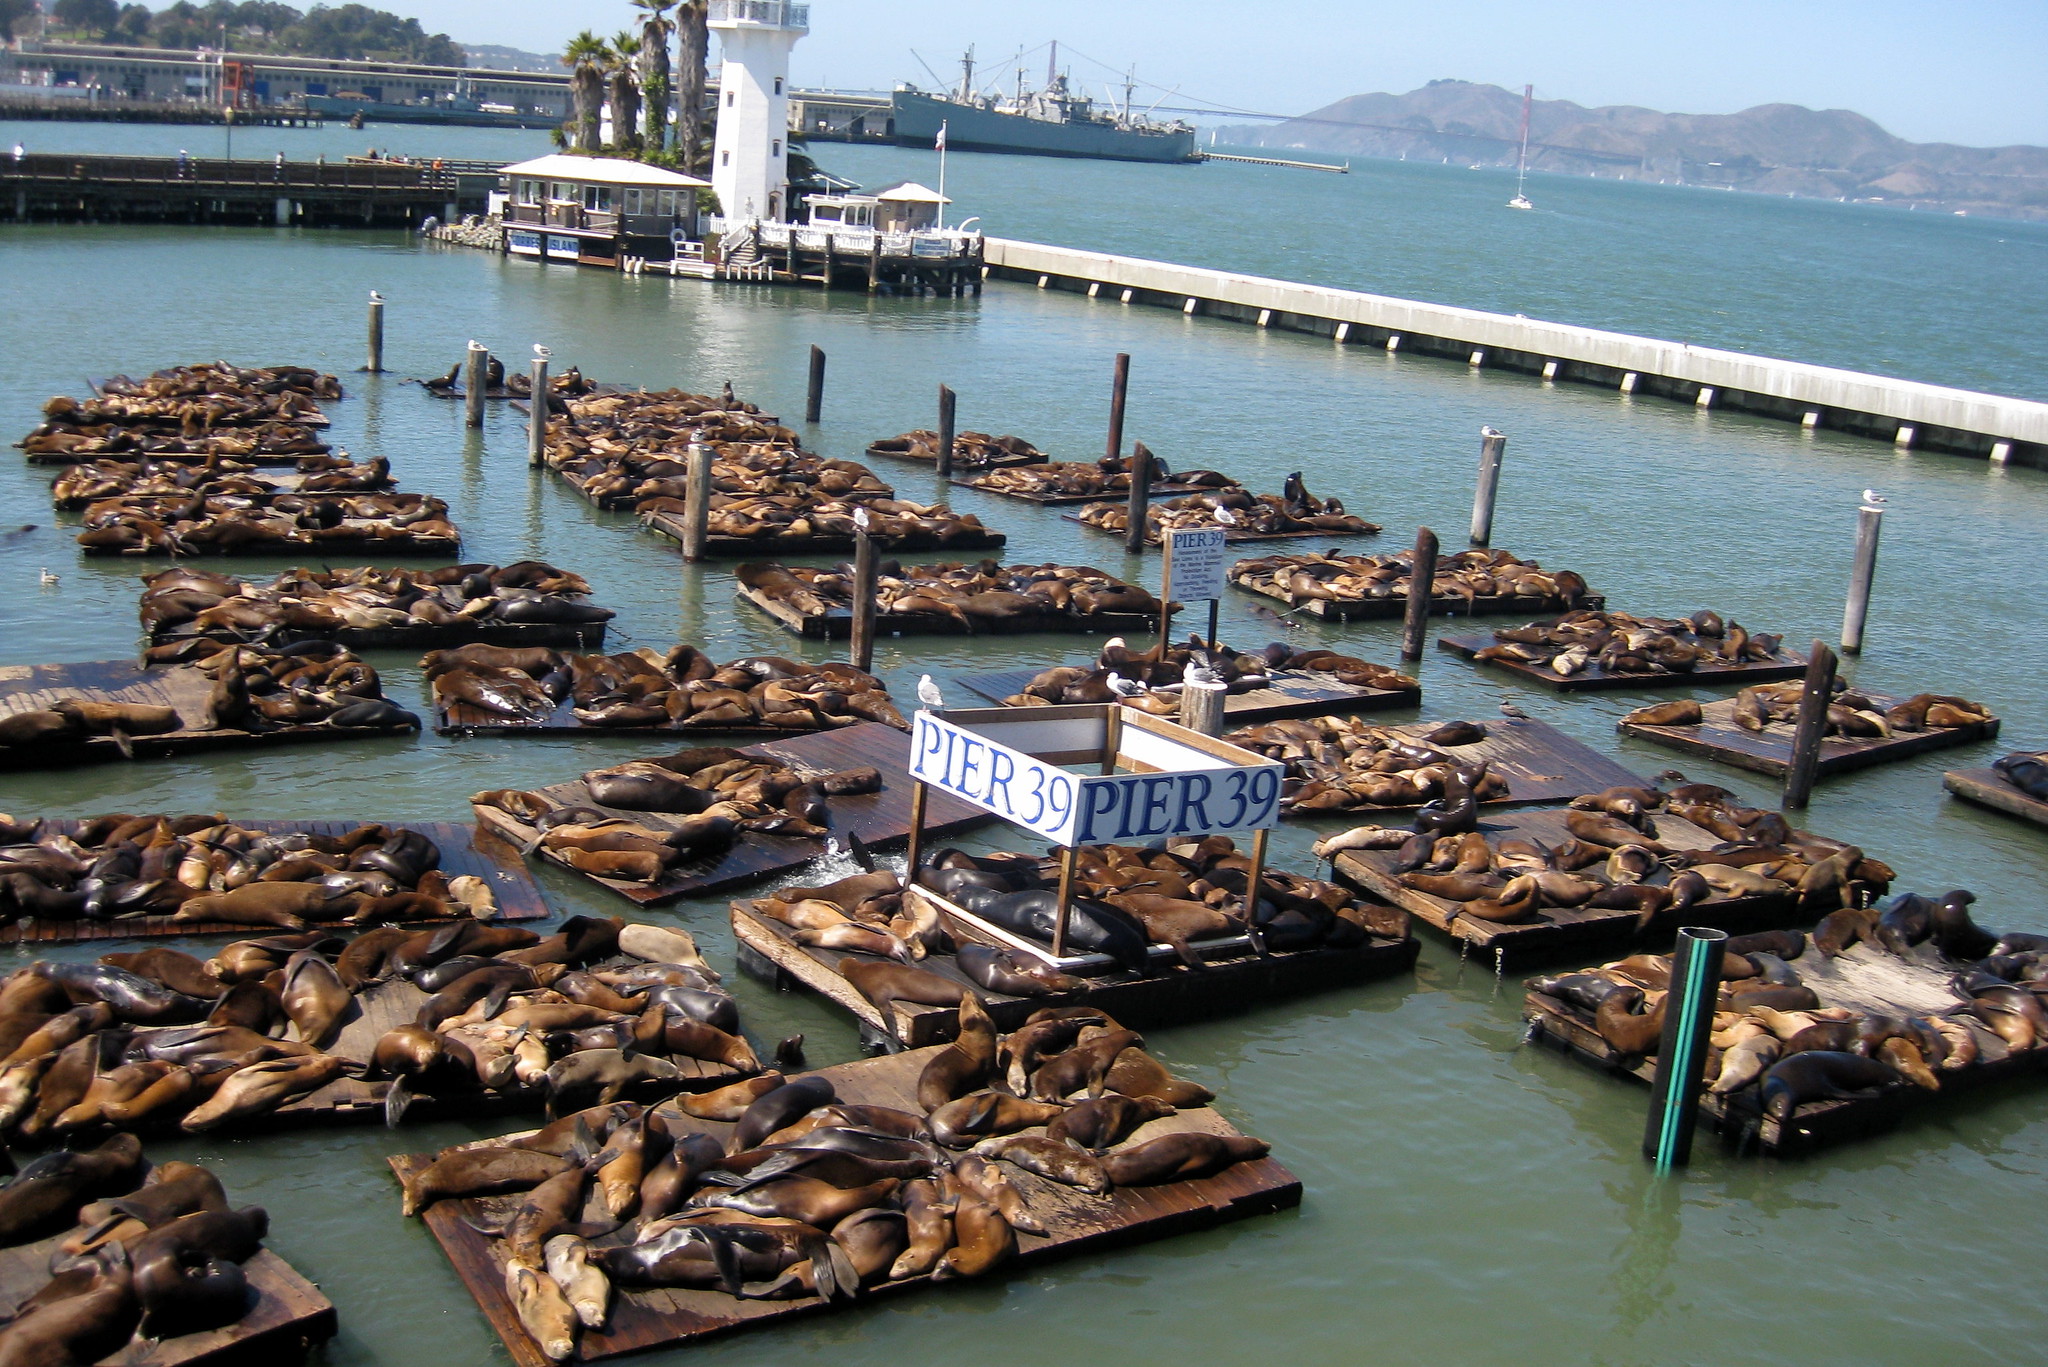 Sea lions dominating docks at a warf used for personal boats.